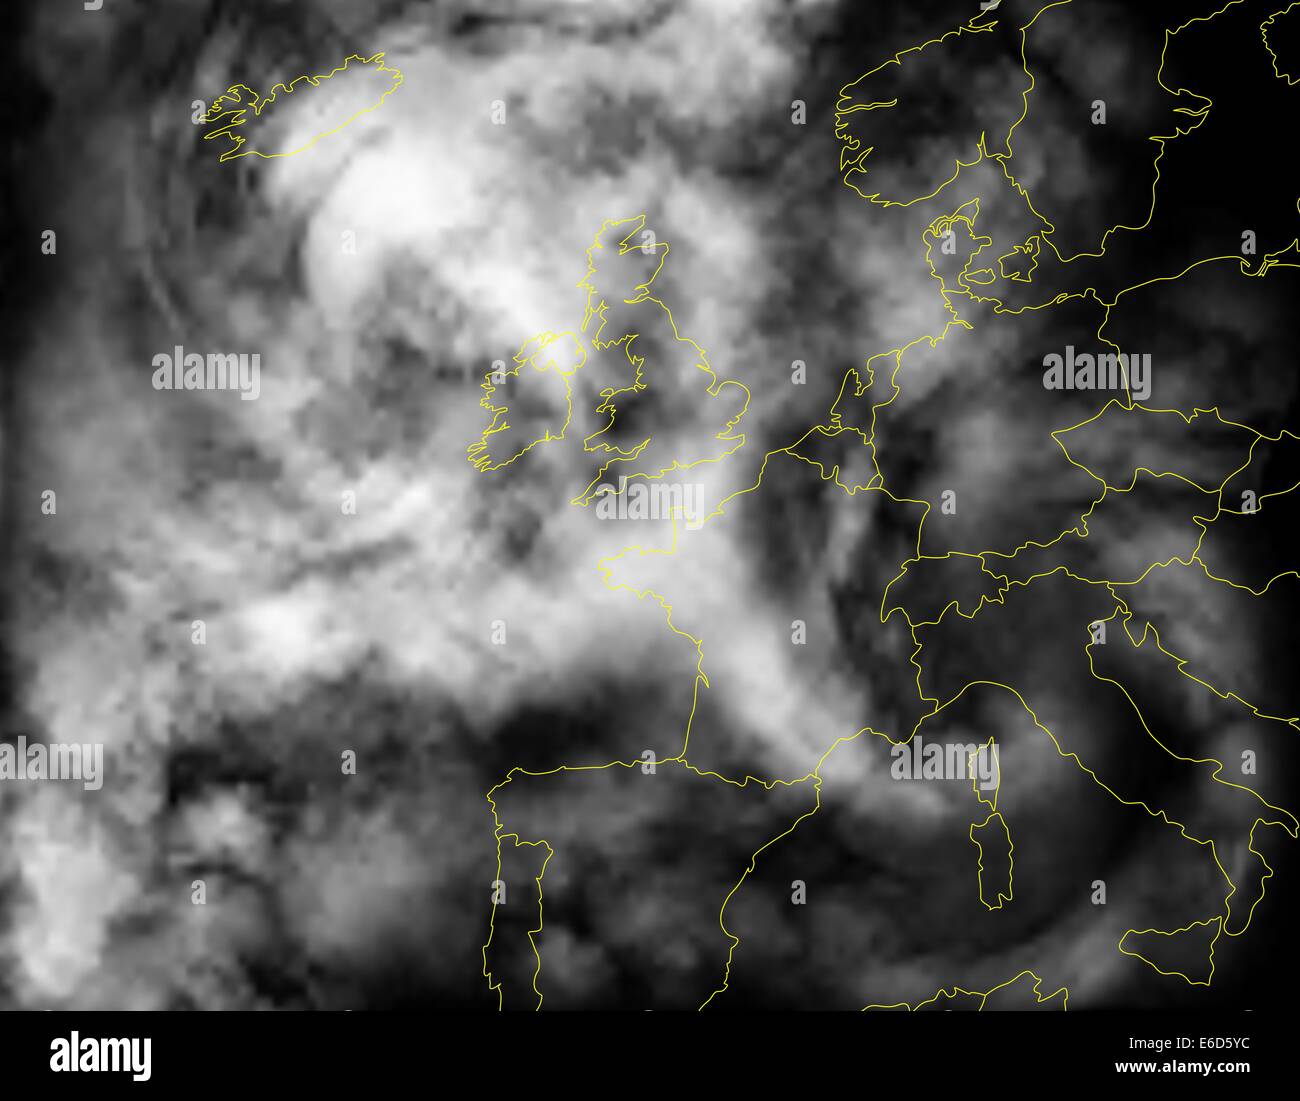 Editable vector illustration of a satellite image of cloud cover over Europe made using a gradient mesh of rendered cloud Stock Vector